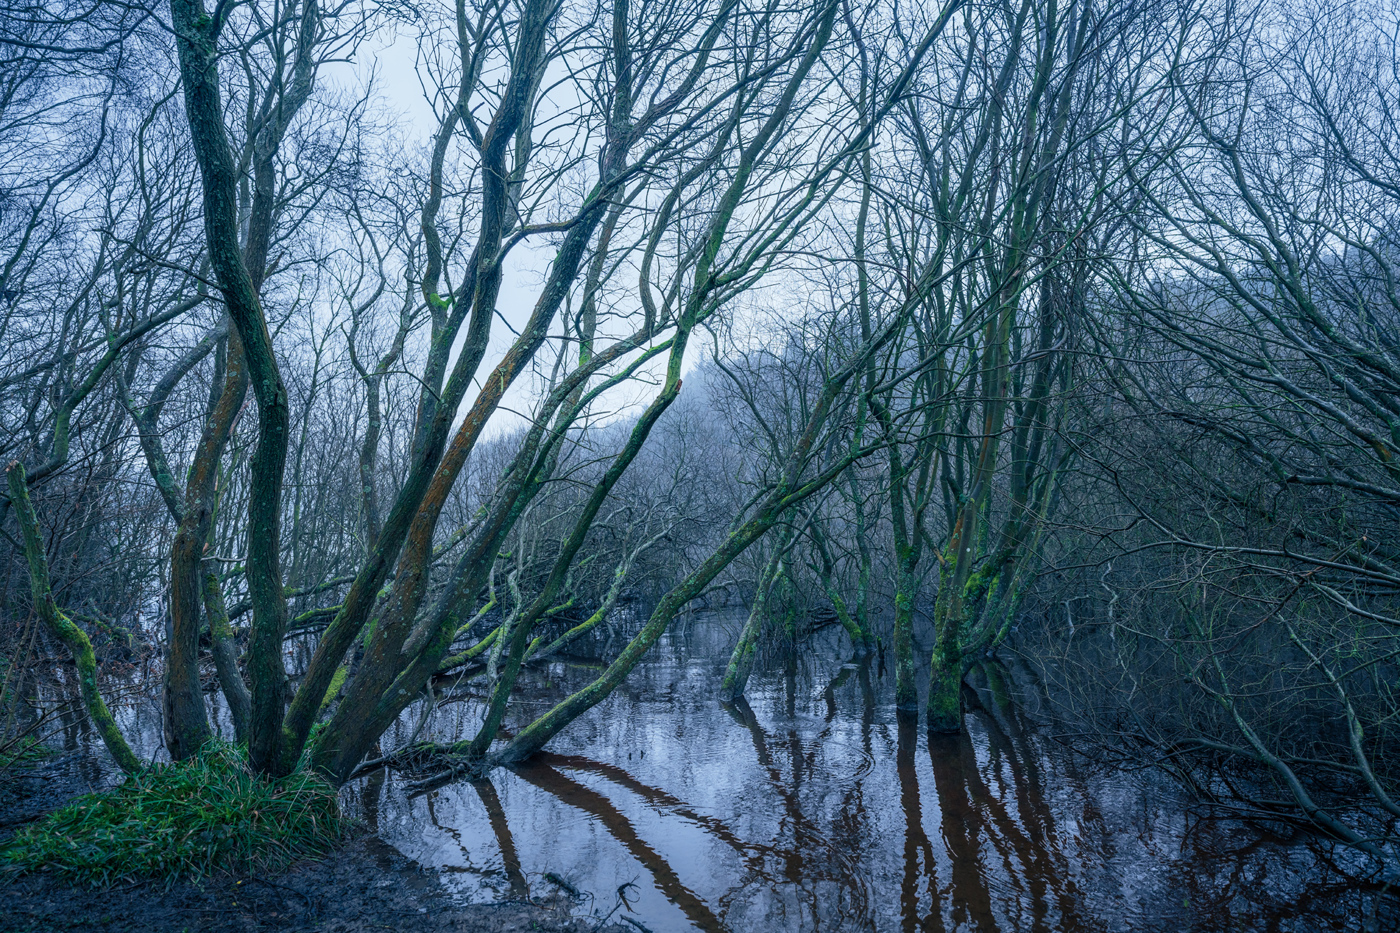 A tranquil woodland scene in North Yorkshire. It's winter, and leafless trees with gnarled, moss-covered branches arch over a serene, reflective reservoir. Their silhouettes intertwine, mirroring in the still water amidst a soft, diffuse light.